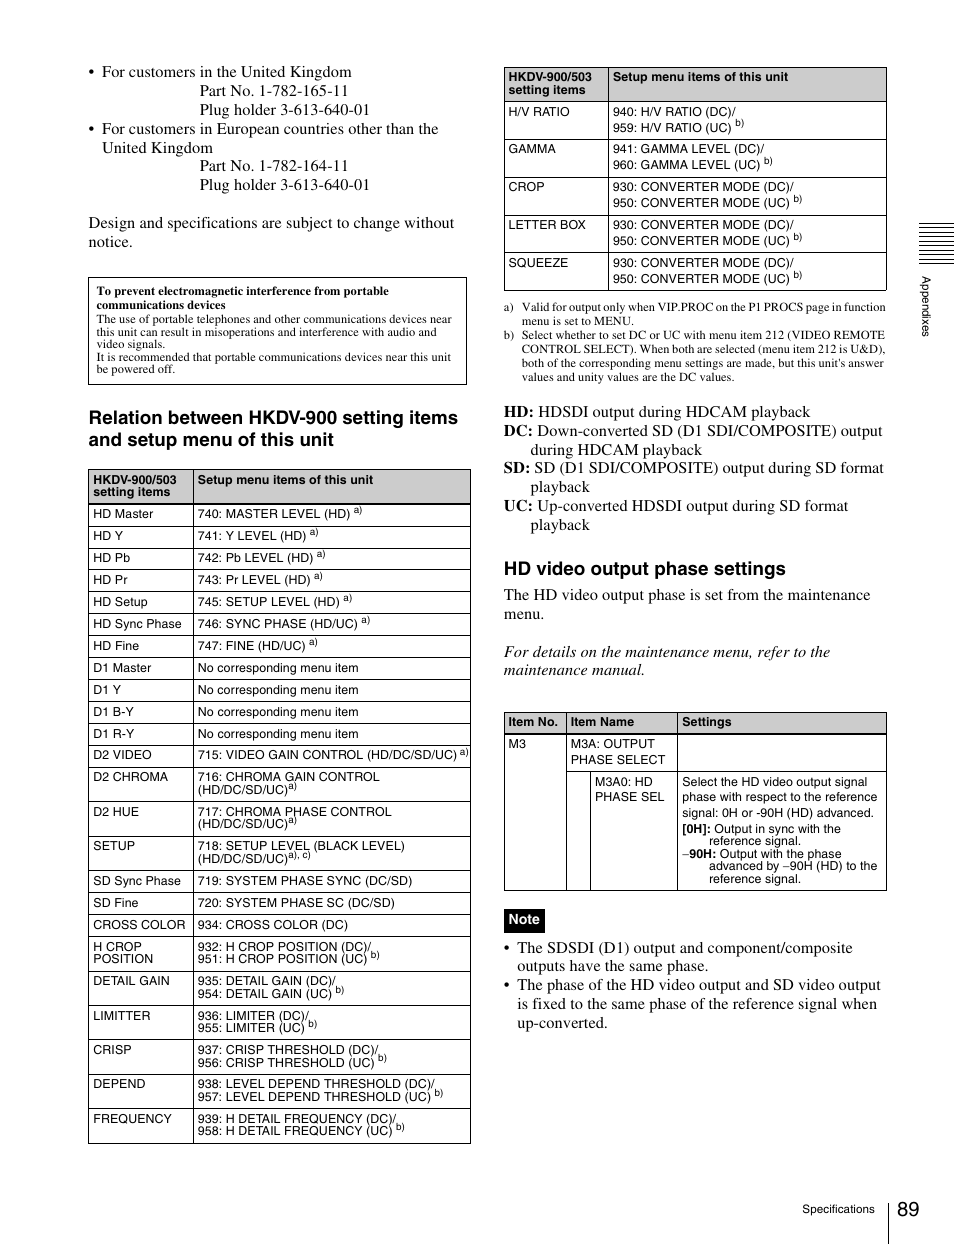 Hd video output phase settings | Sony HDW-S280 User Manual | Page 89 / 94